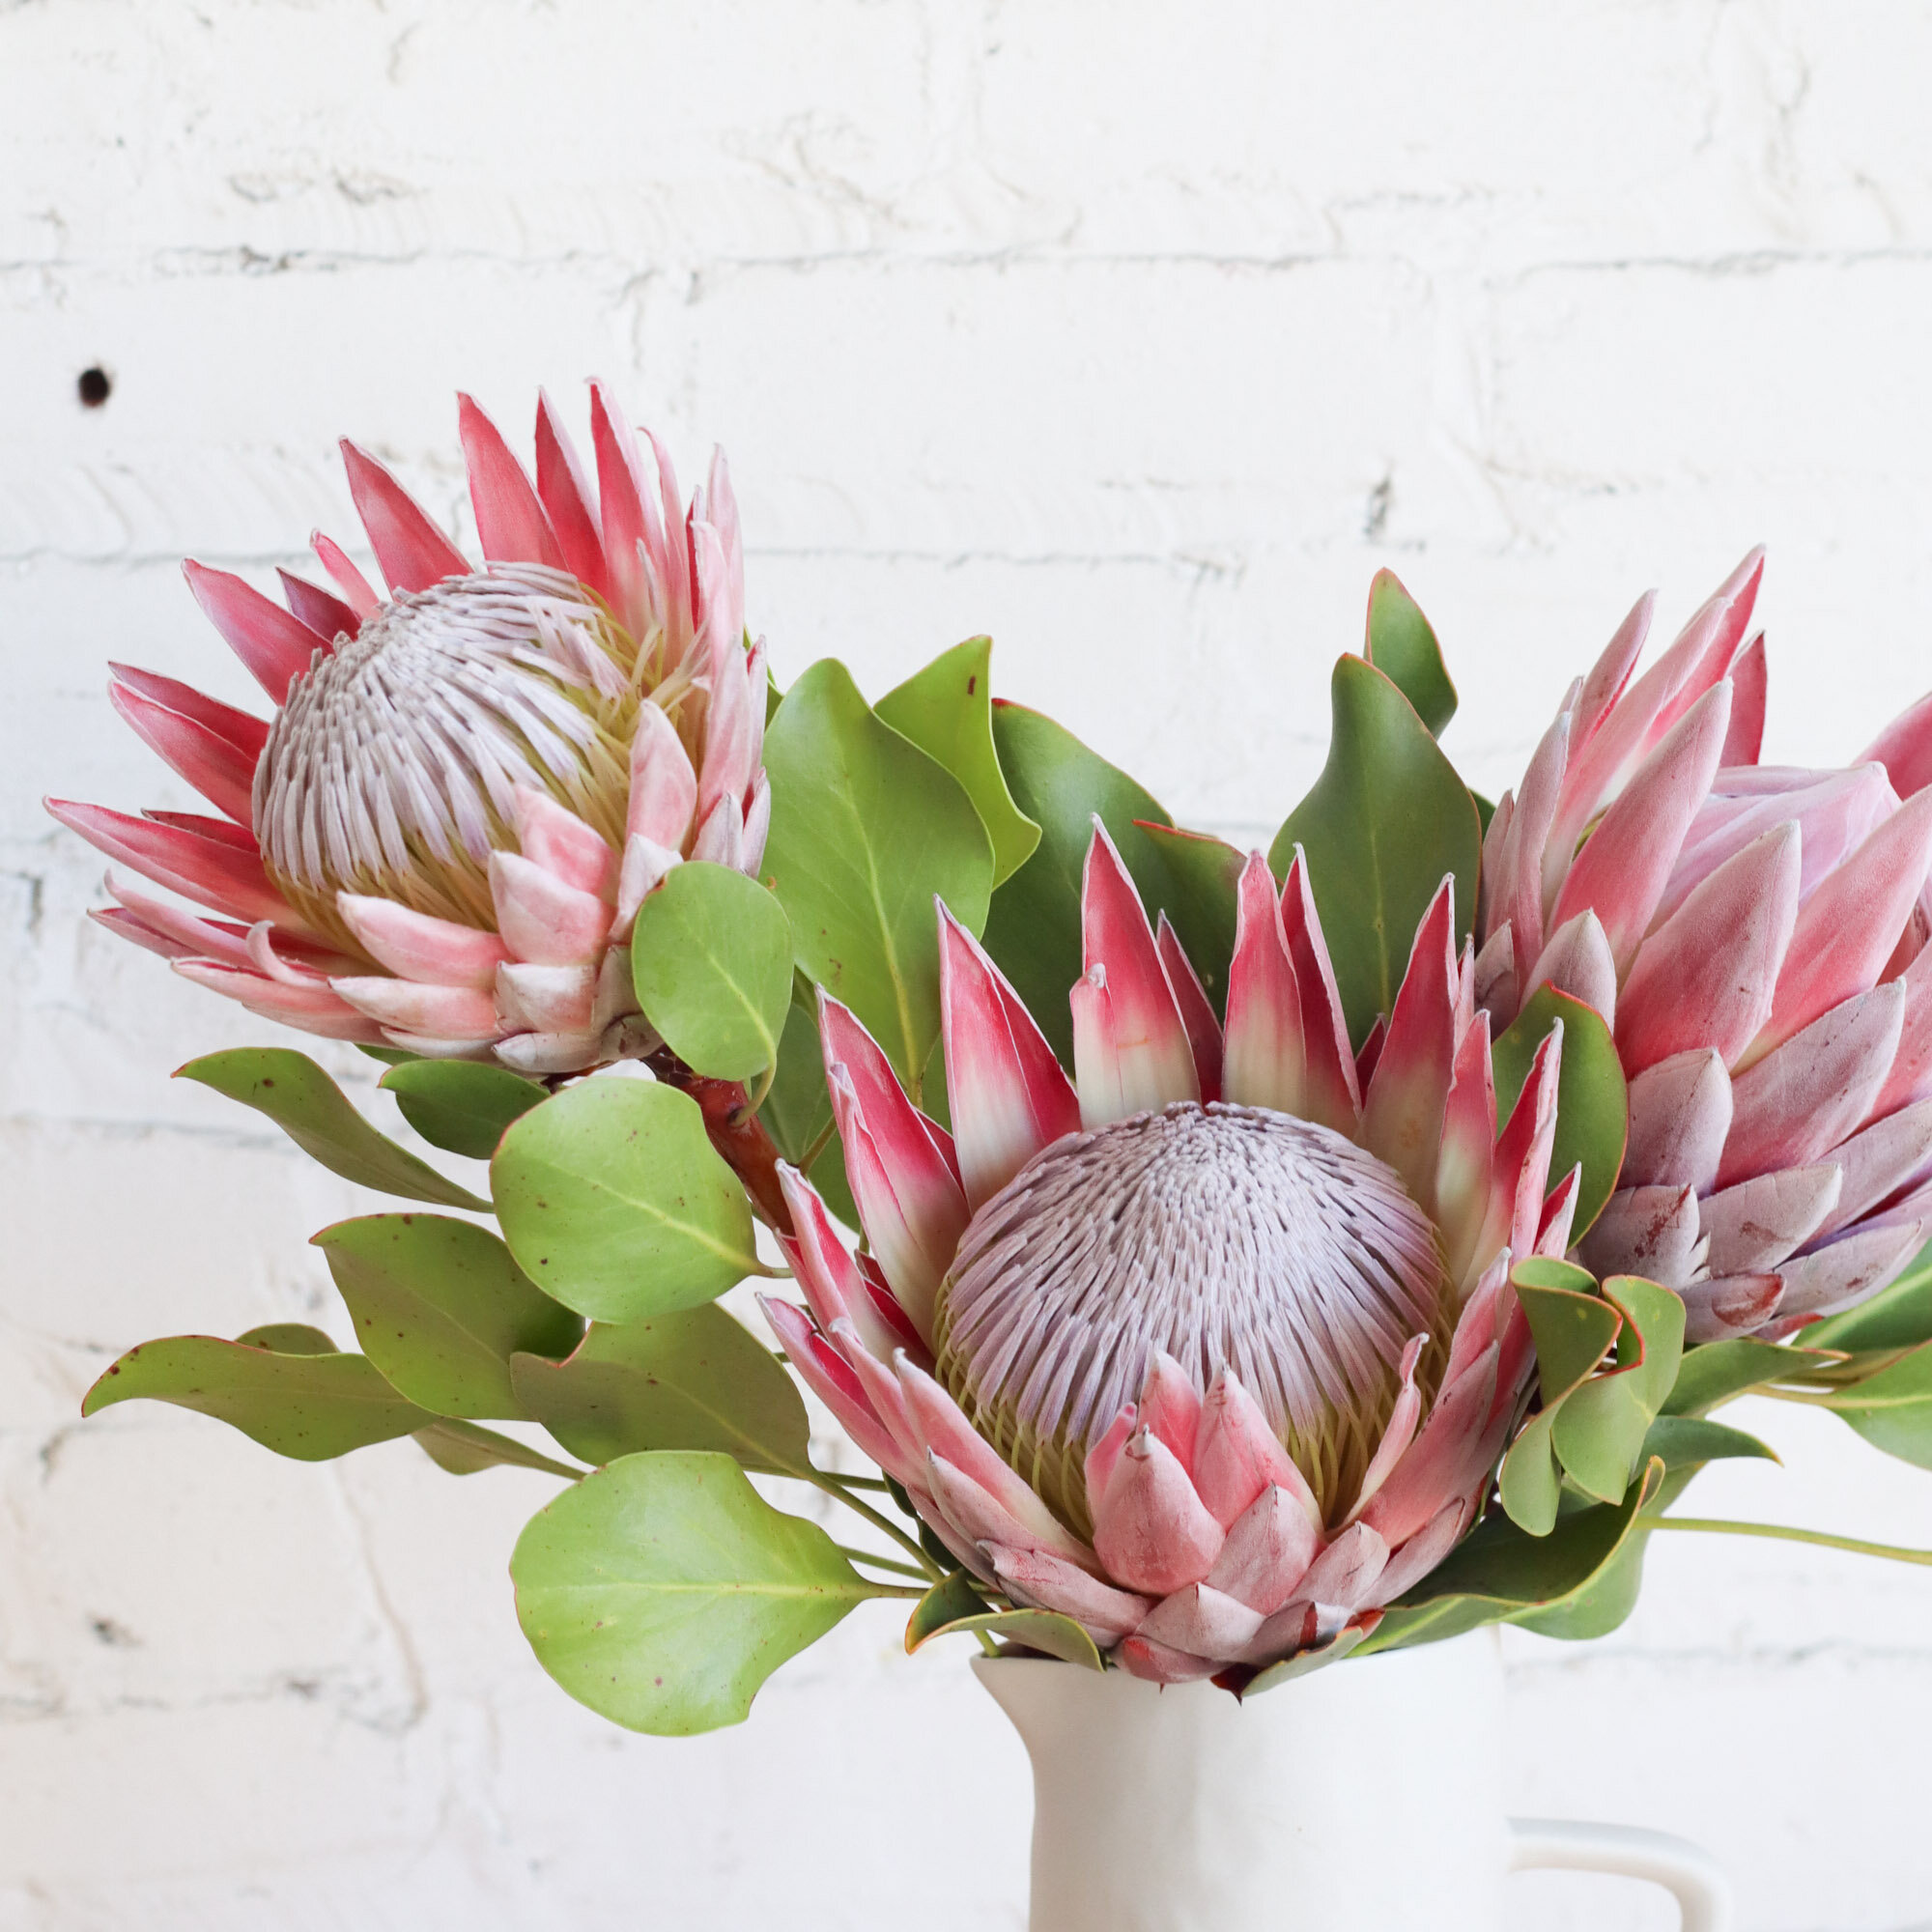 Three pink protea heads in a white vase photographed in front of a white brick wall